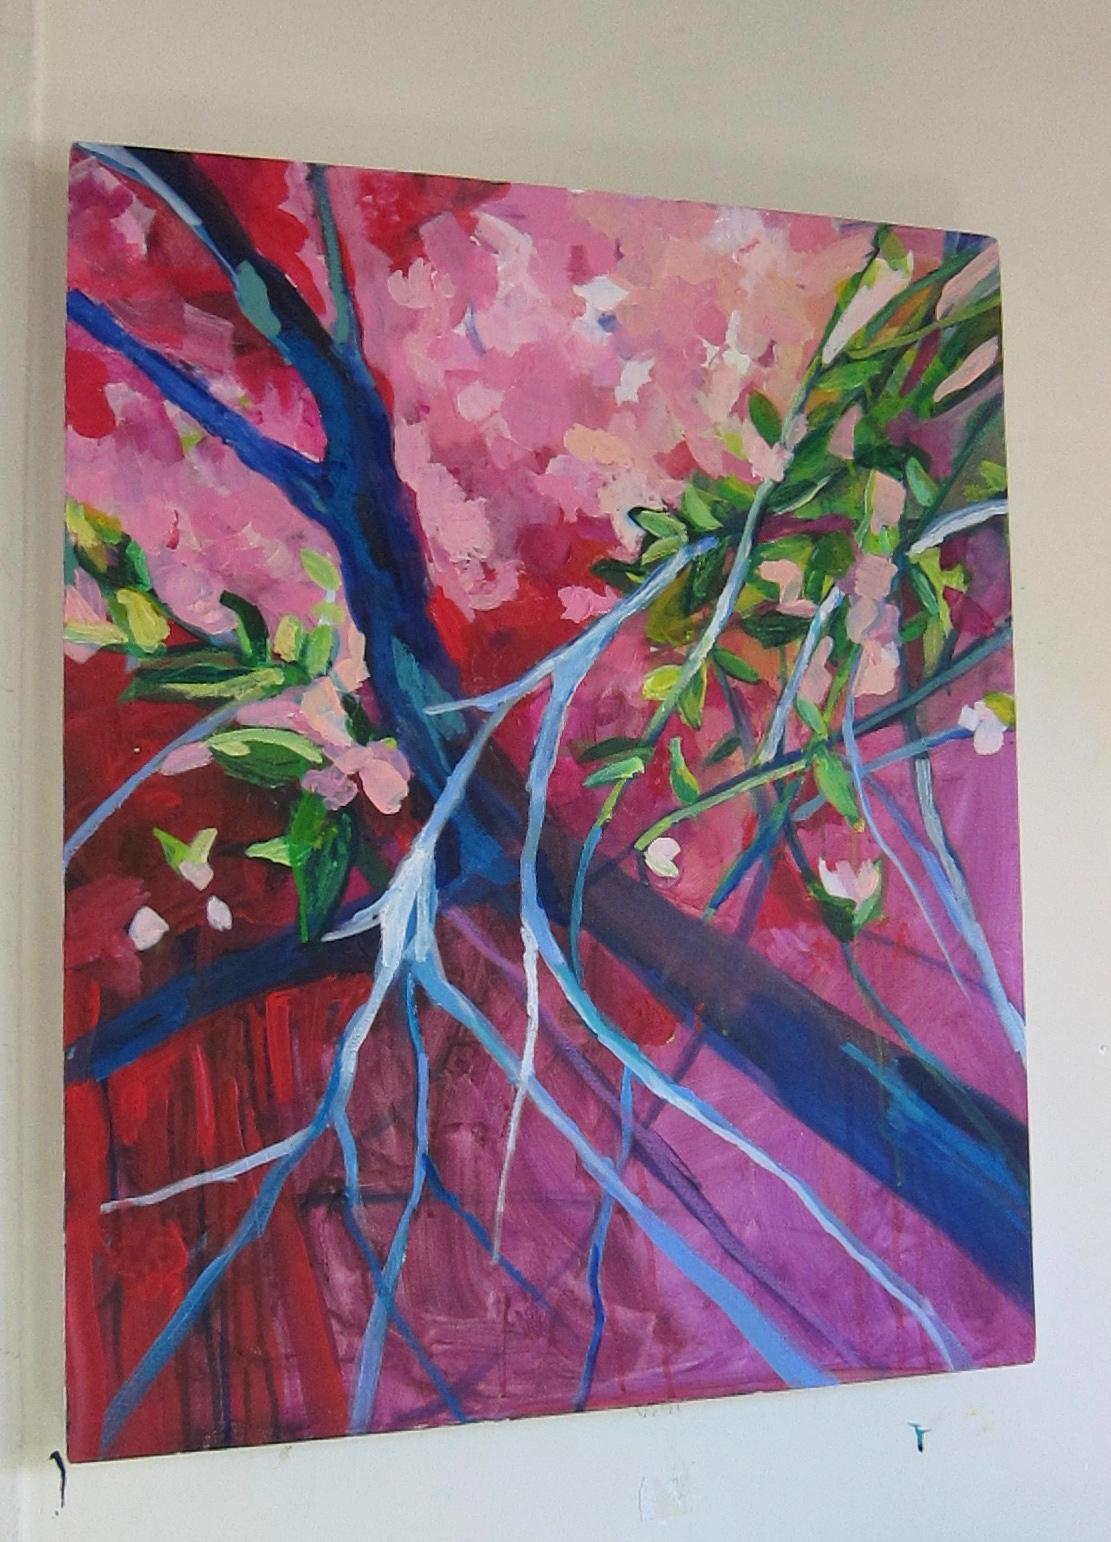 Medley of Blossoms - Painting by Colette Wirz Nauke